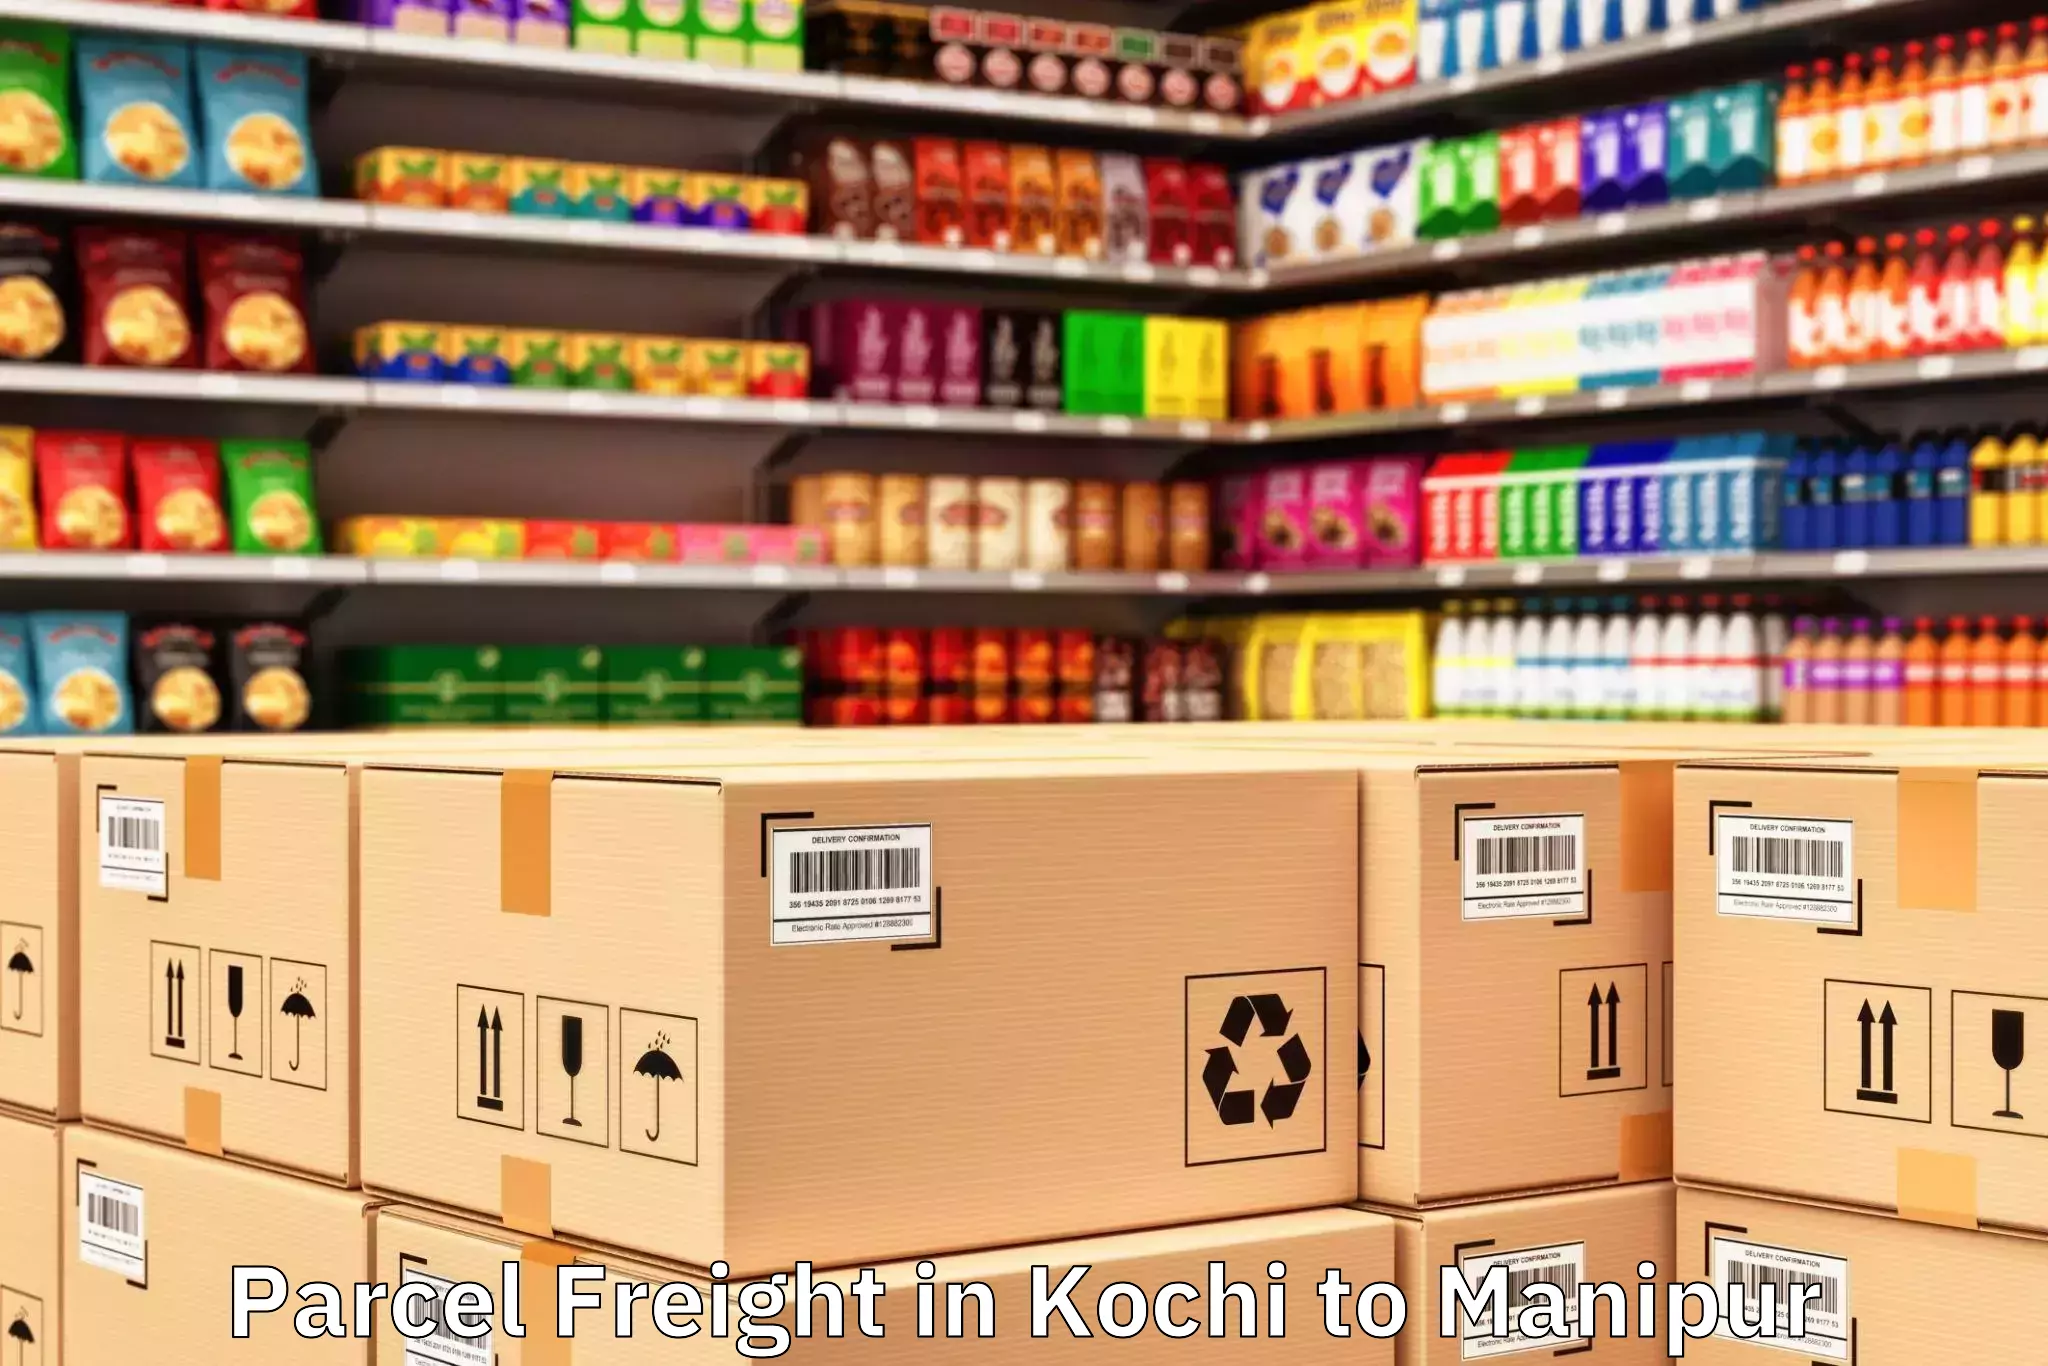 Expert Kochi to Manipur Parcel Freight